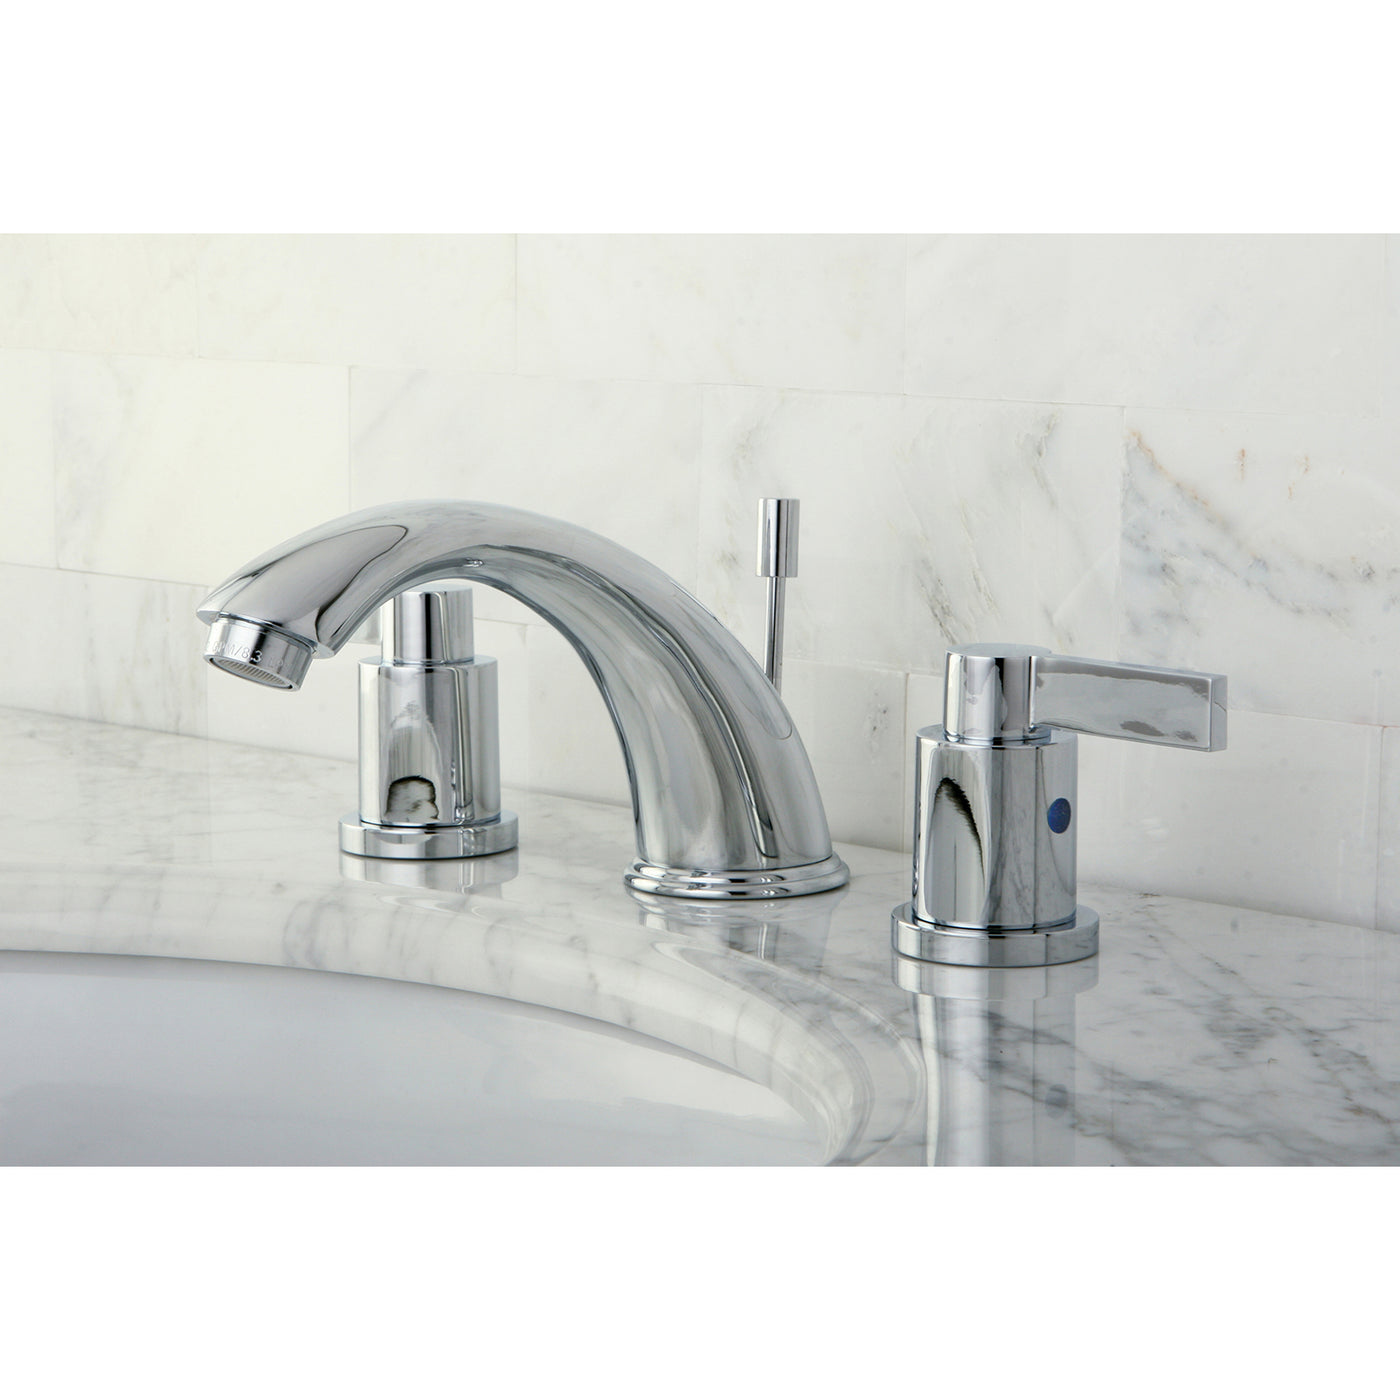 Elements of Design EB8961NDL Widespread Bathroom Faucet with Retail Pop-Up, Polished Chrome